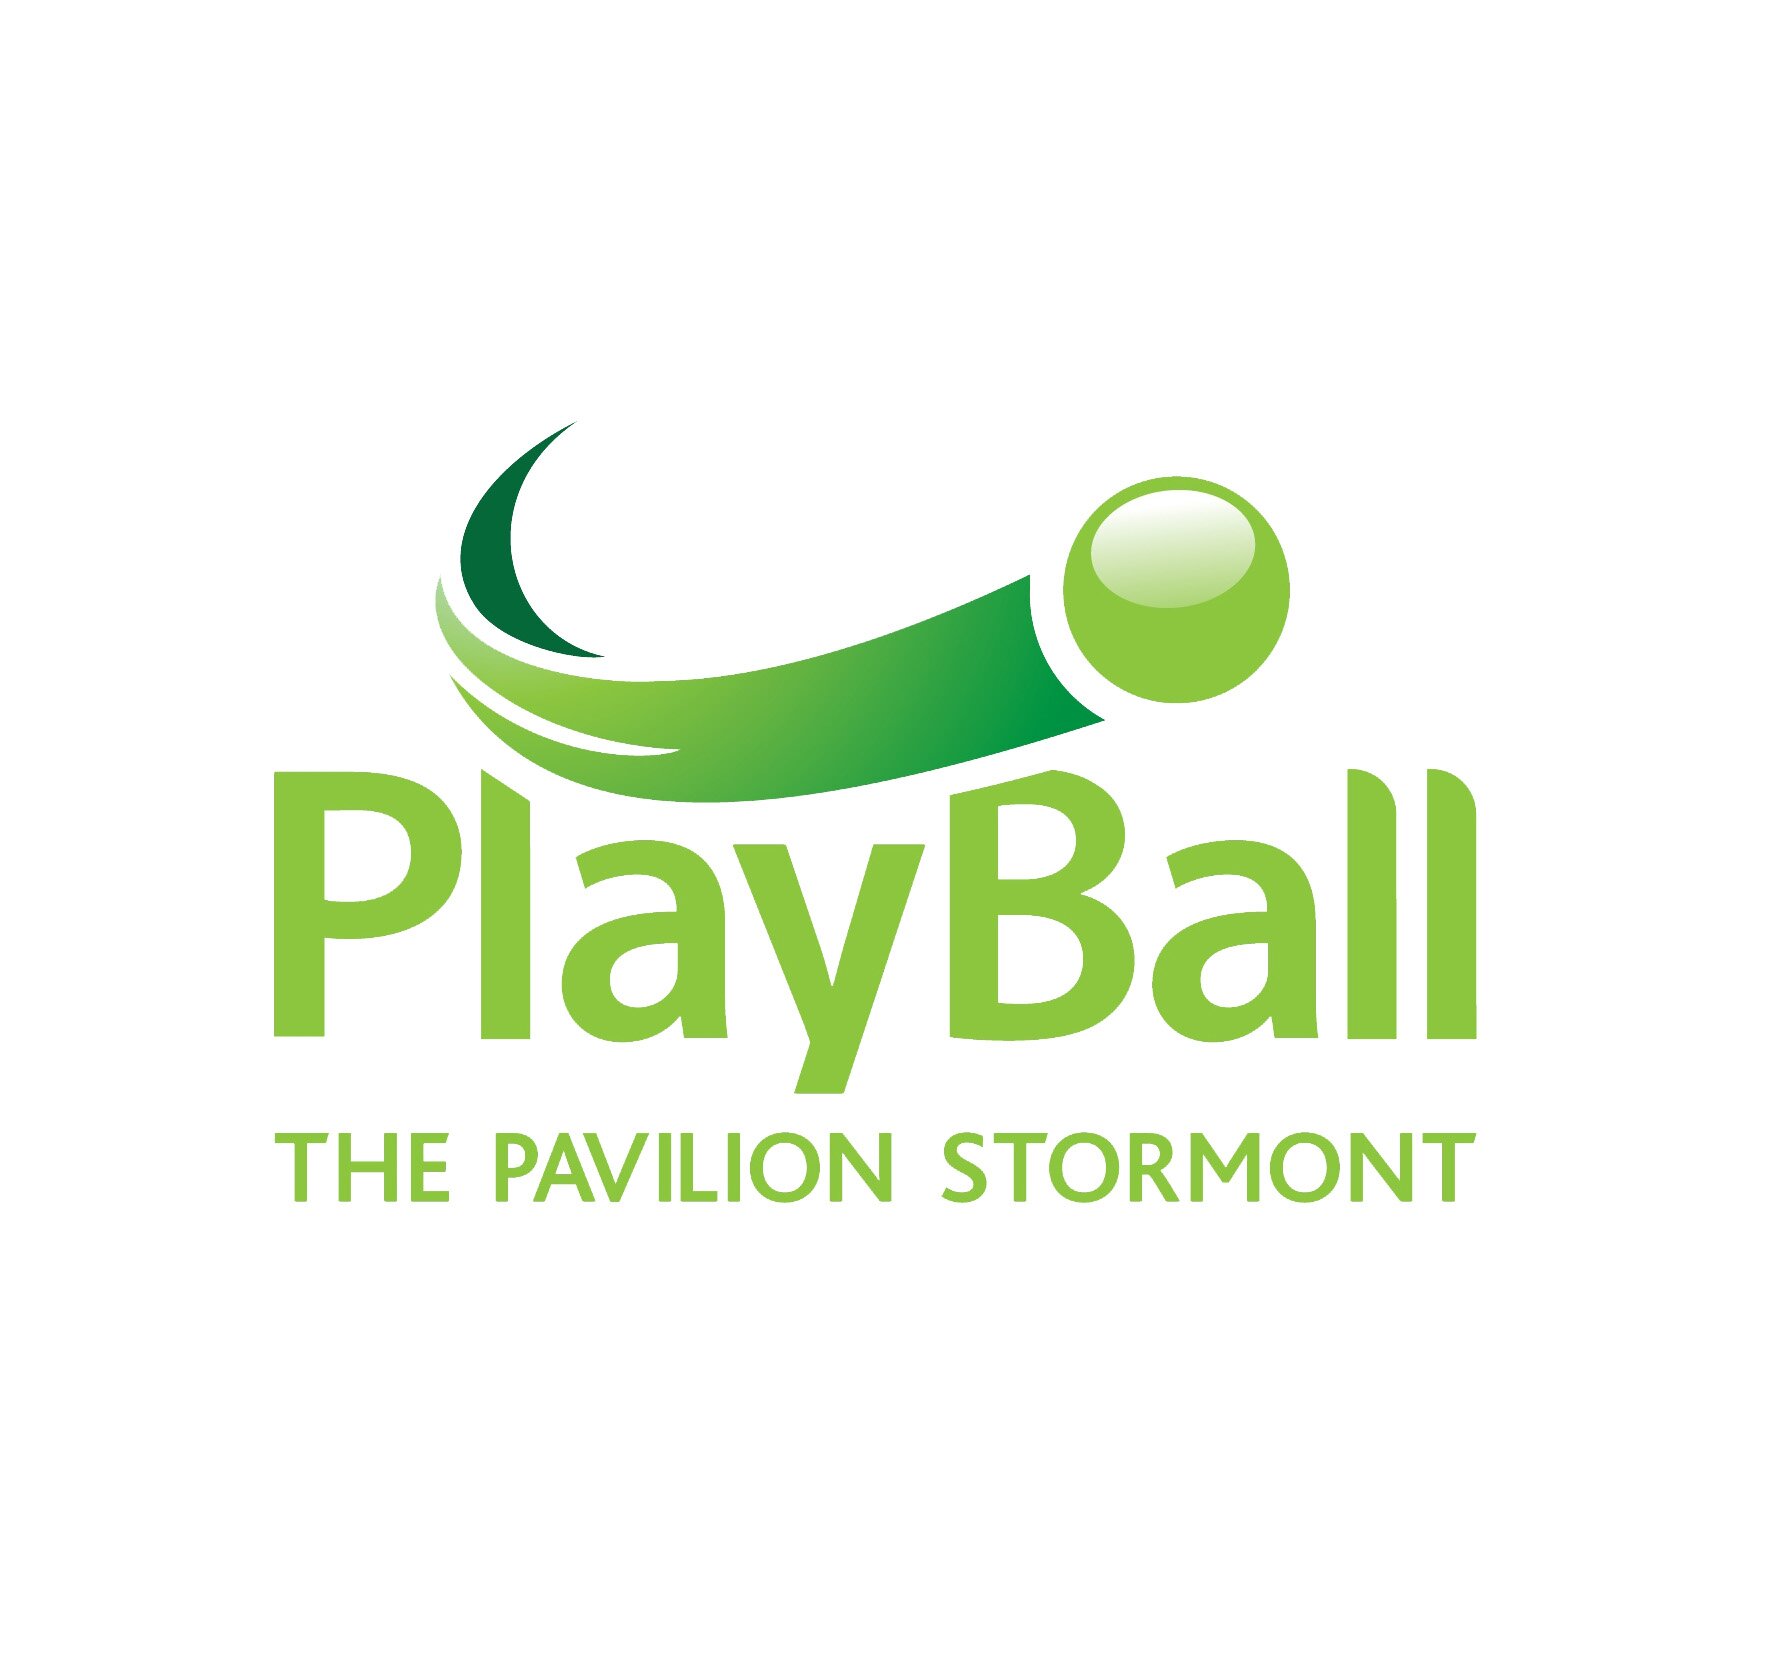 PlayBall, Stormont offers the ultimate experience in 3rd generation playing facilities.  Visit http://t.co/8DXawvbmlP